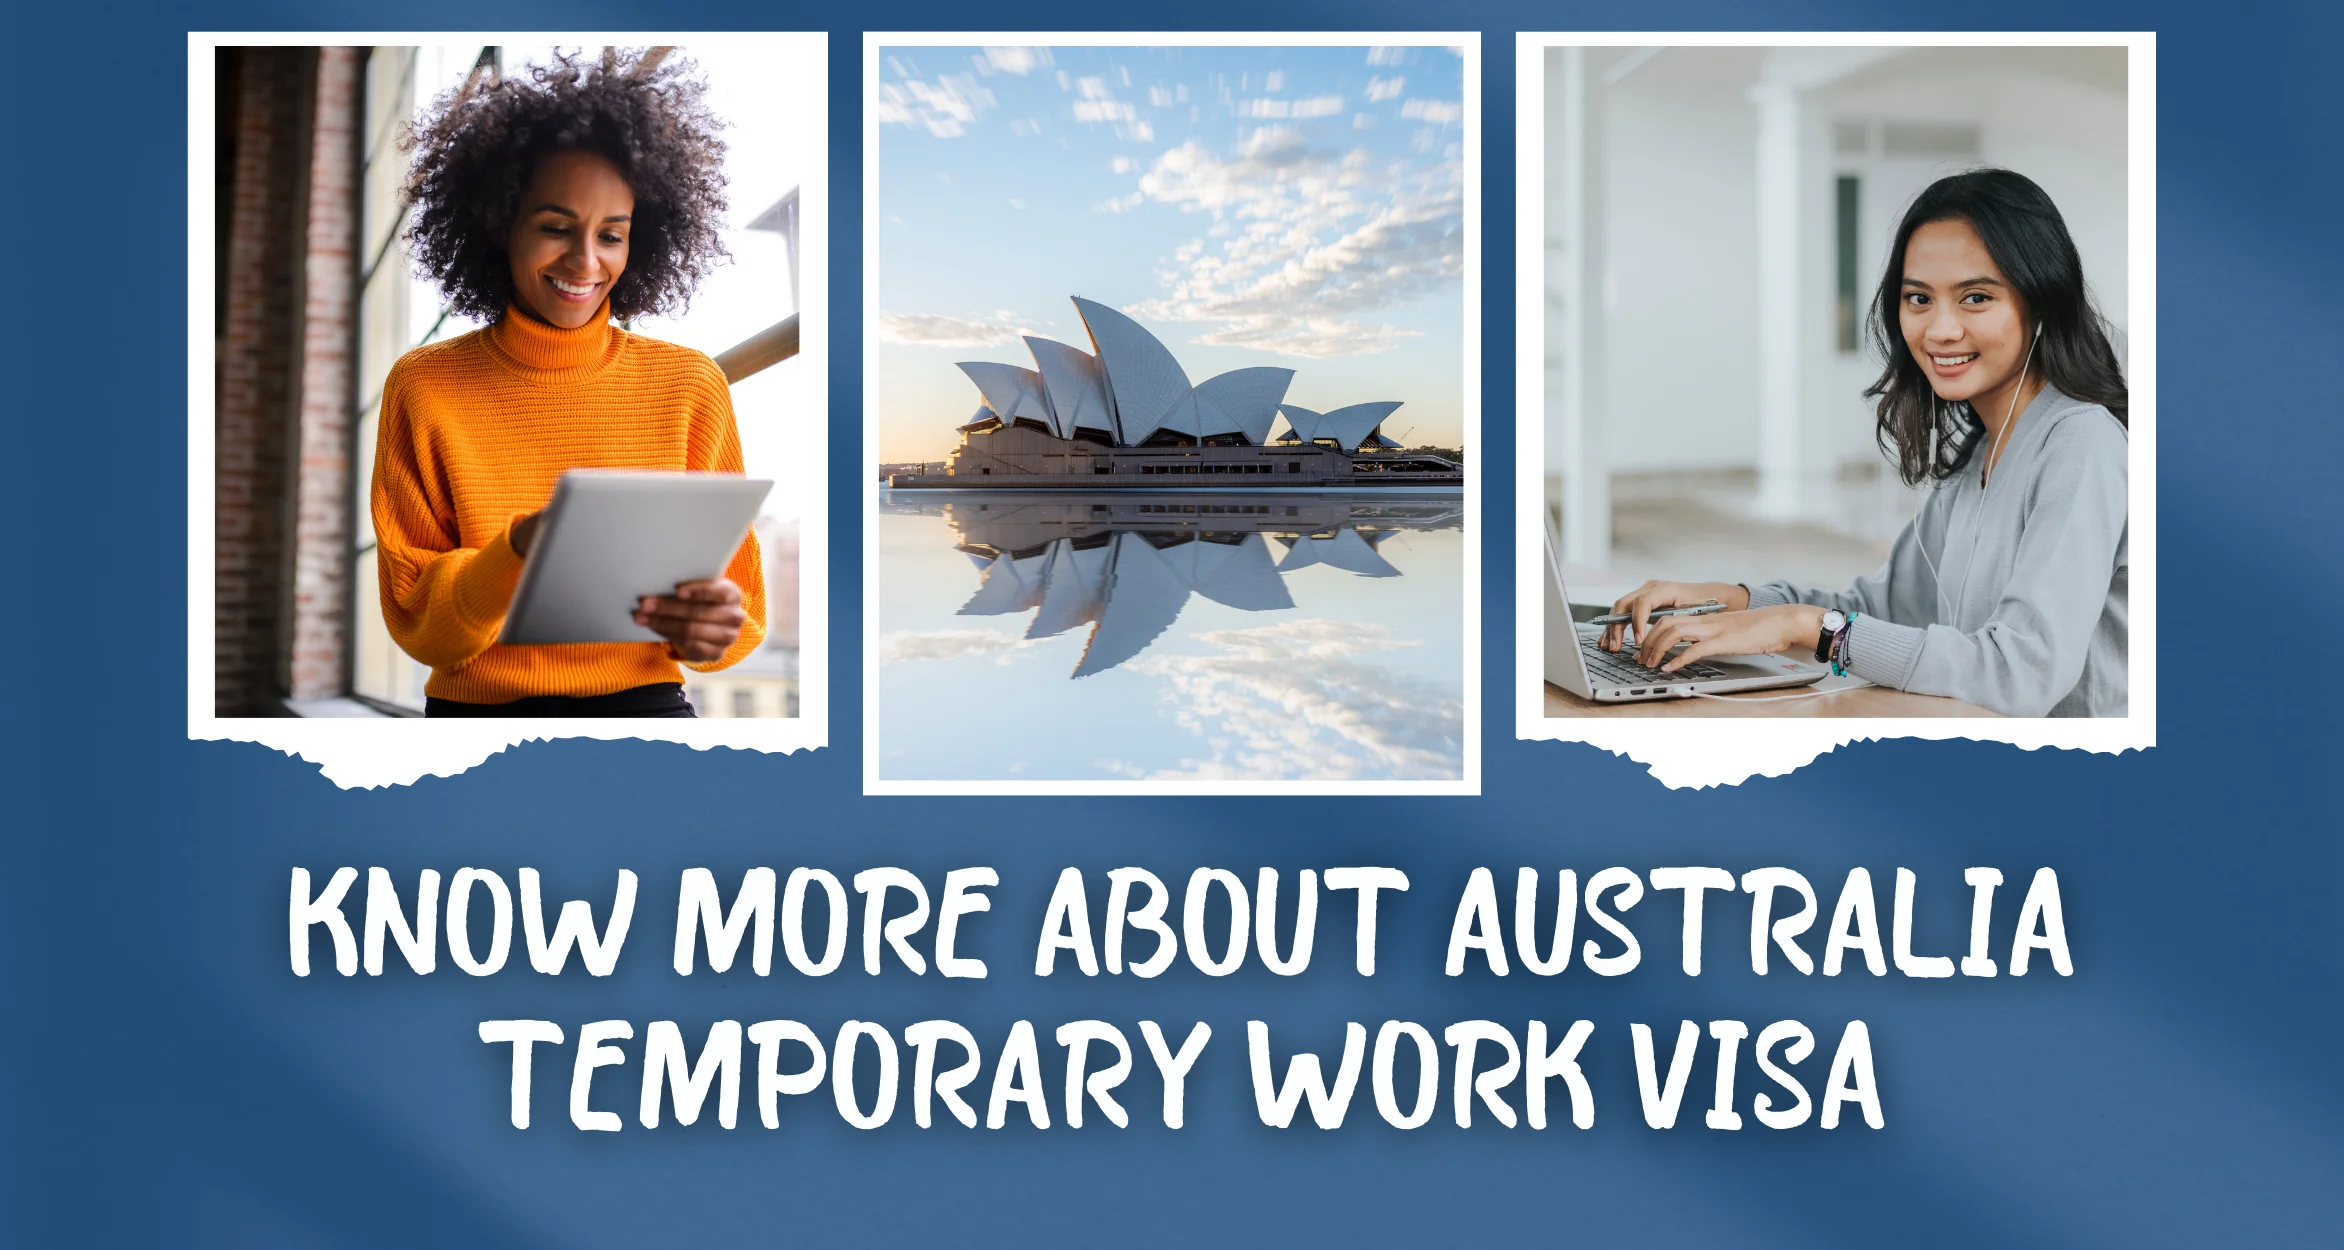 Know more about Australia temporary work visa